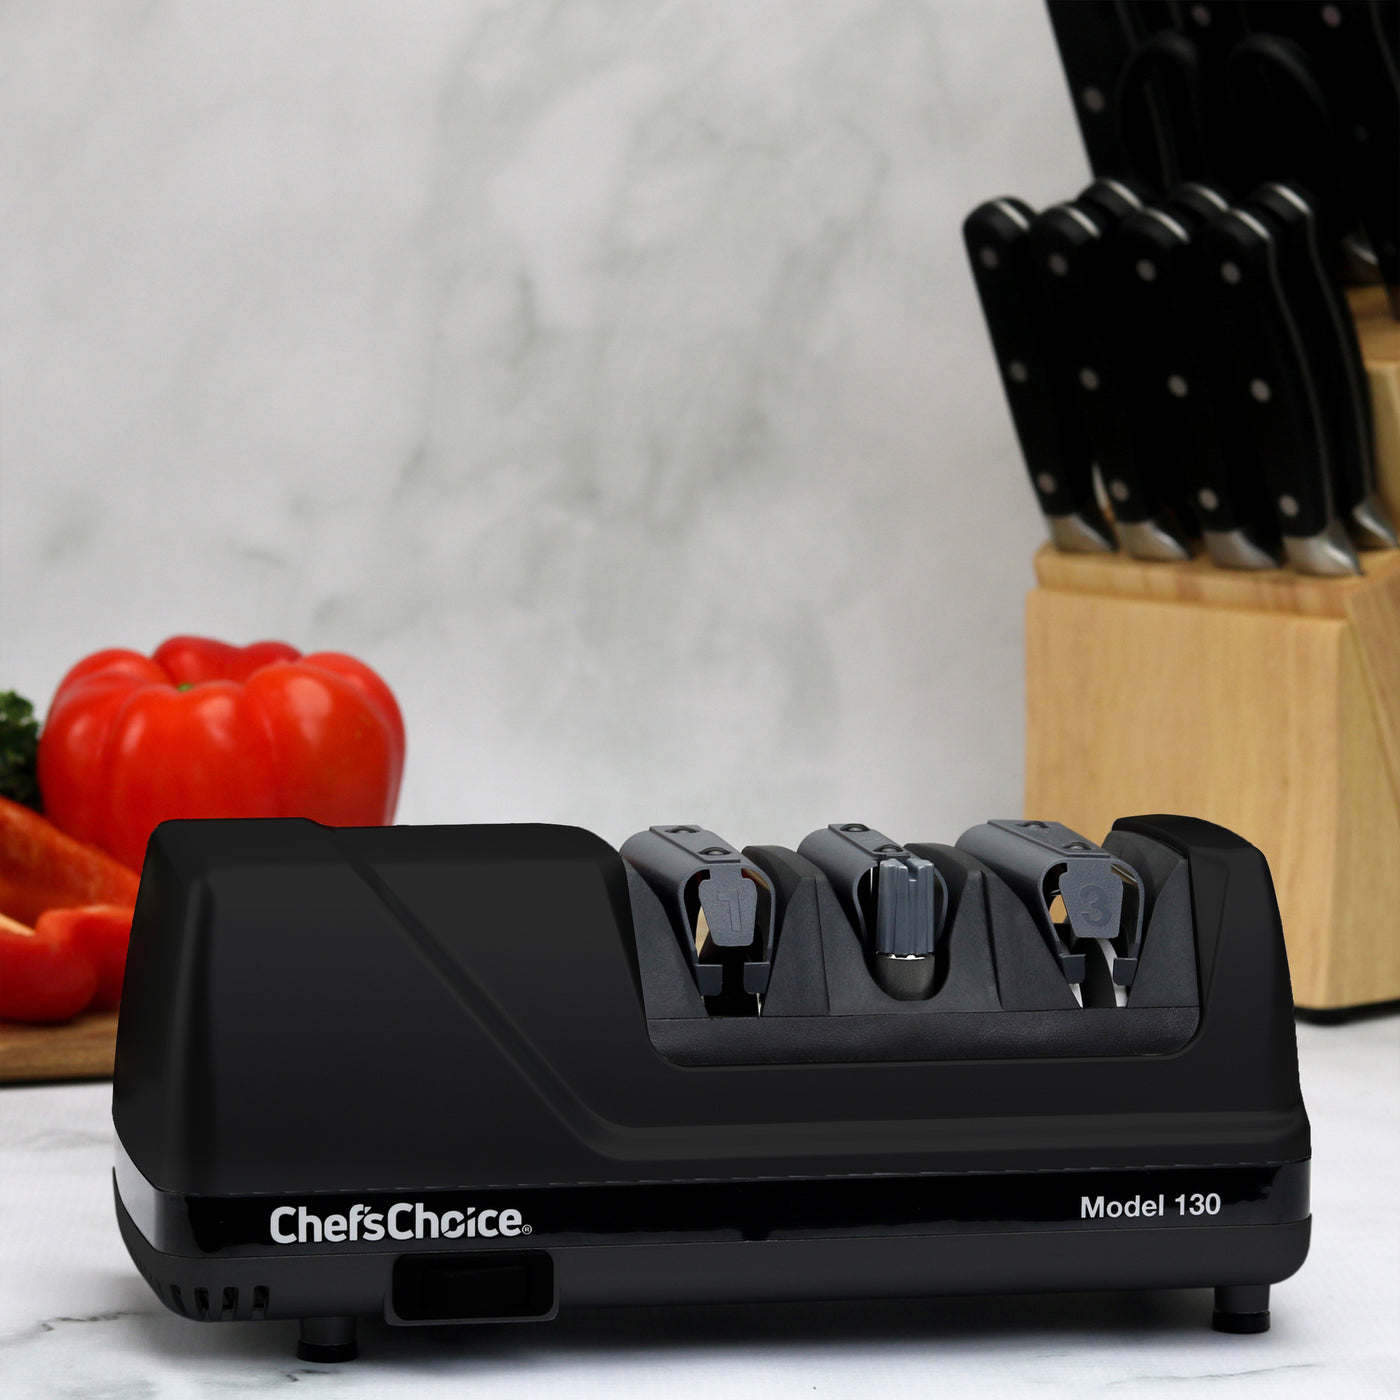 Chef'sChoice 130 Professional Knife Sharpening Station